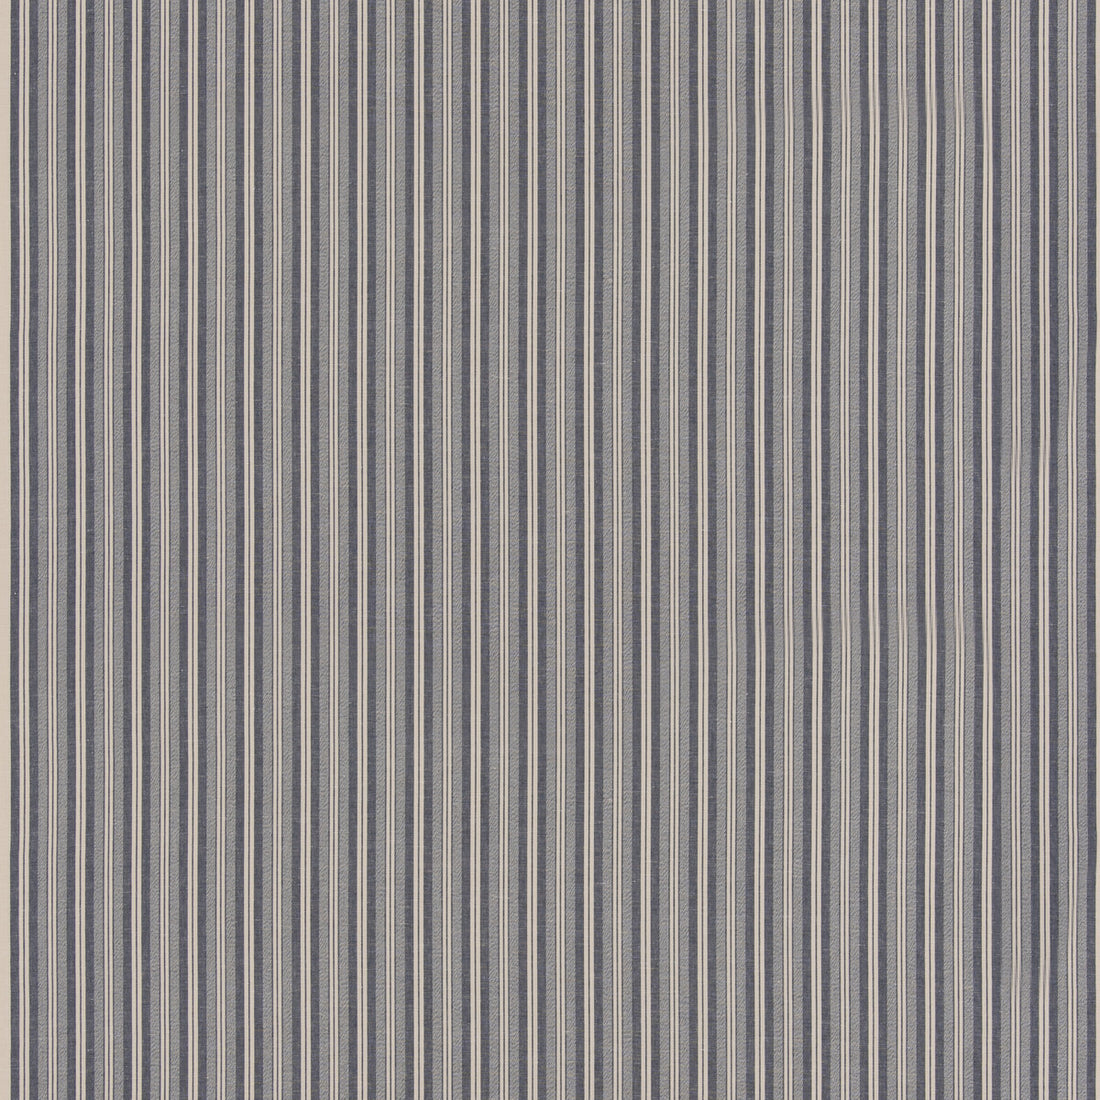 Laverton Stripe fabric in indigo color - pattern BF11037.680.0 - by G P &amp; J Baker in the Baker House Plain &amp; Stripe II collection